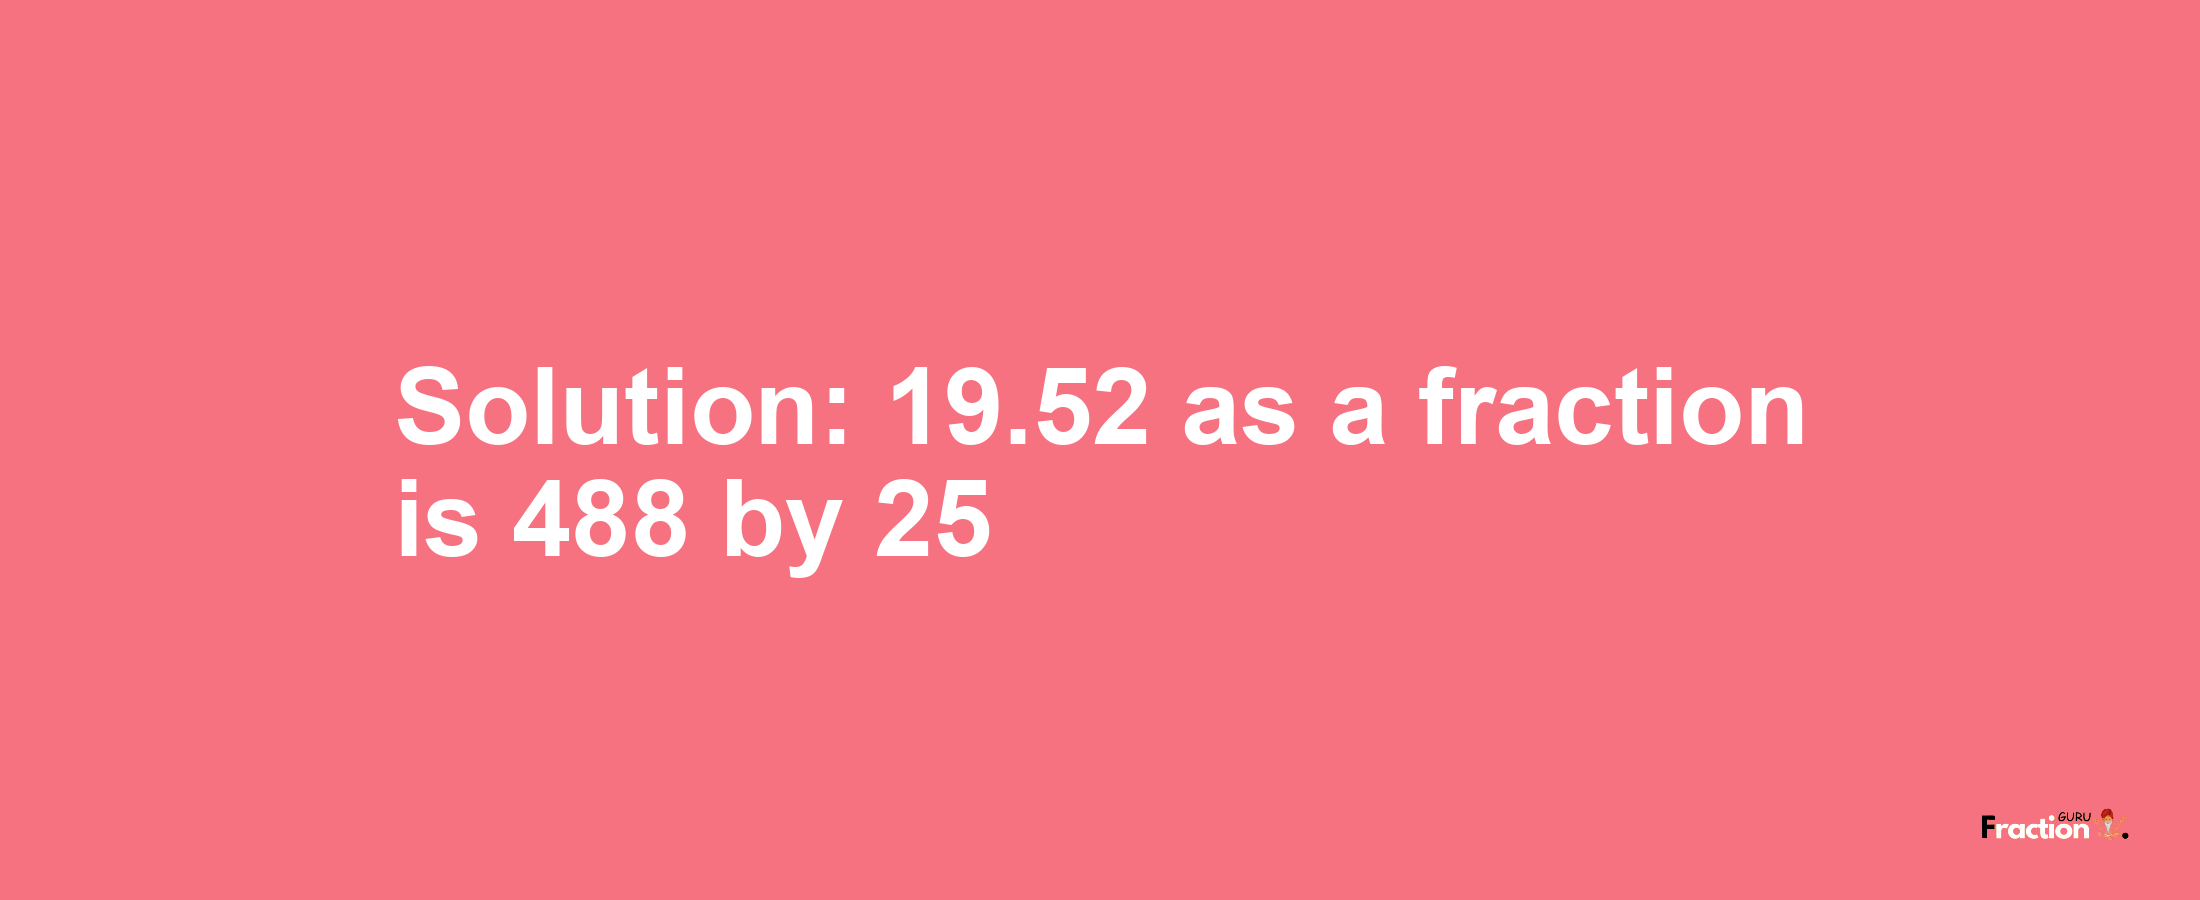 Solution:19.52 as a fraction is 488/25